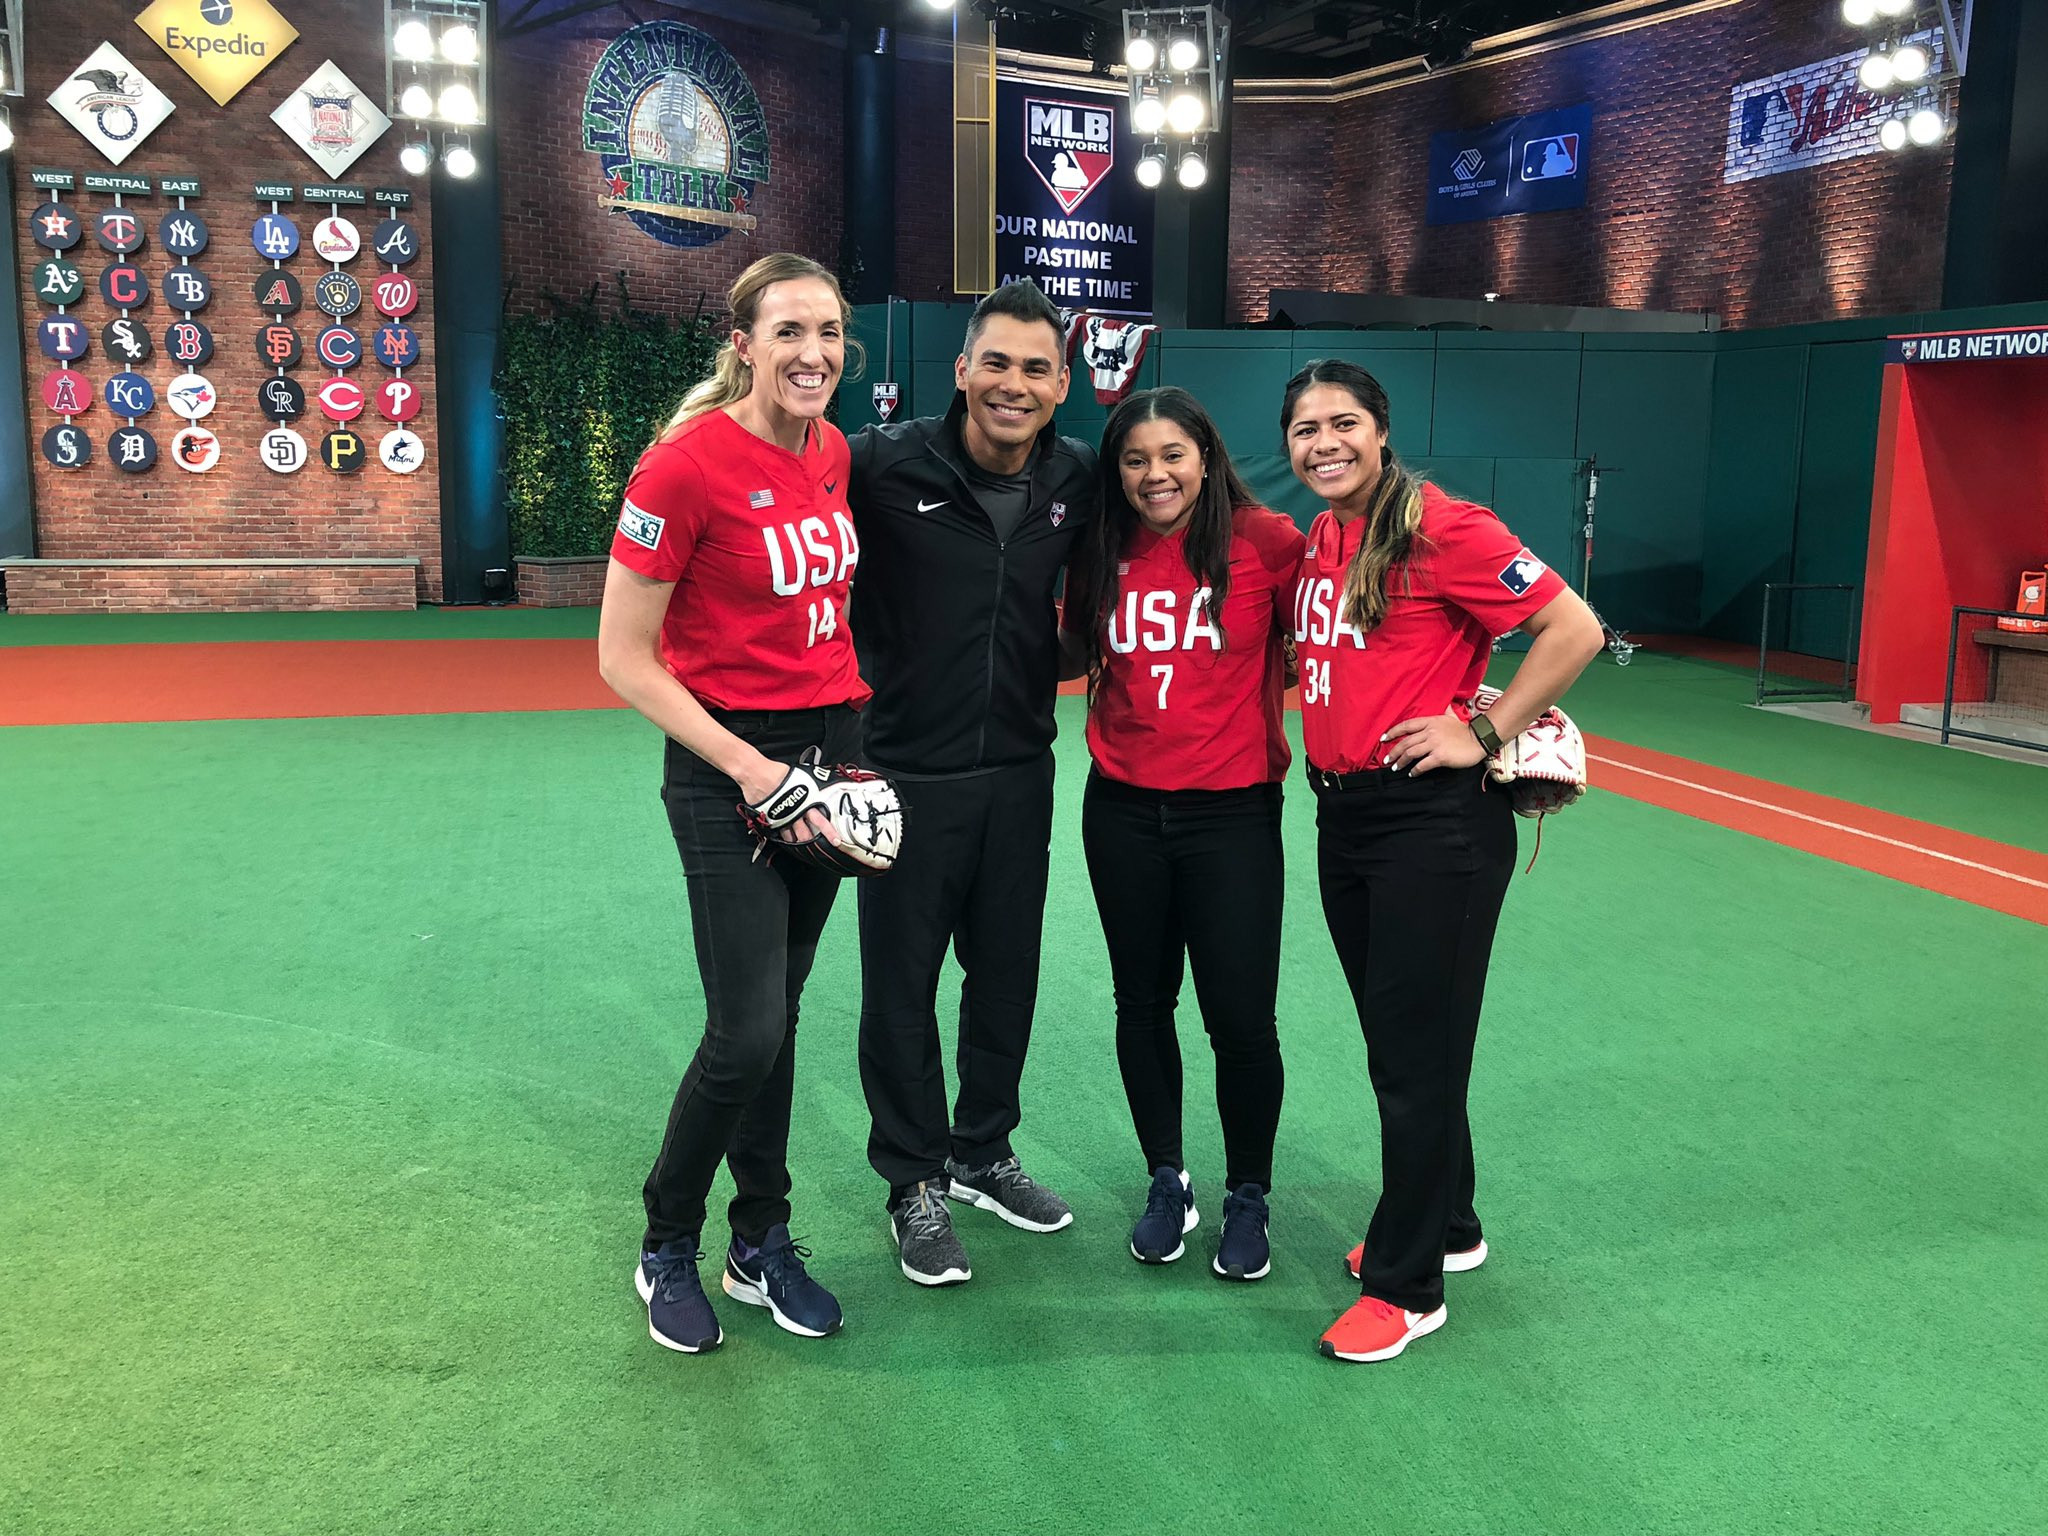 Major League Baseball has been revealed as the sponsor of USA Softball's nationwide tour ©Twitter